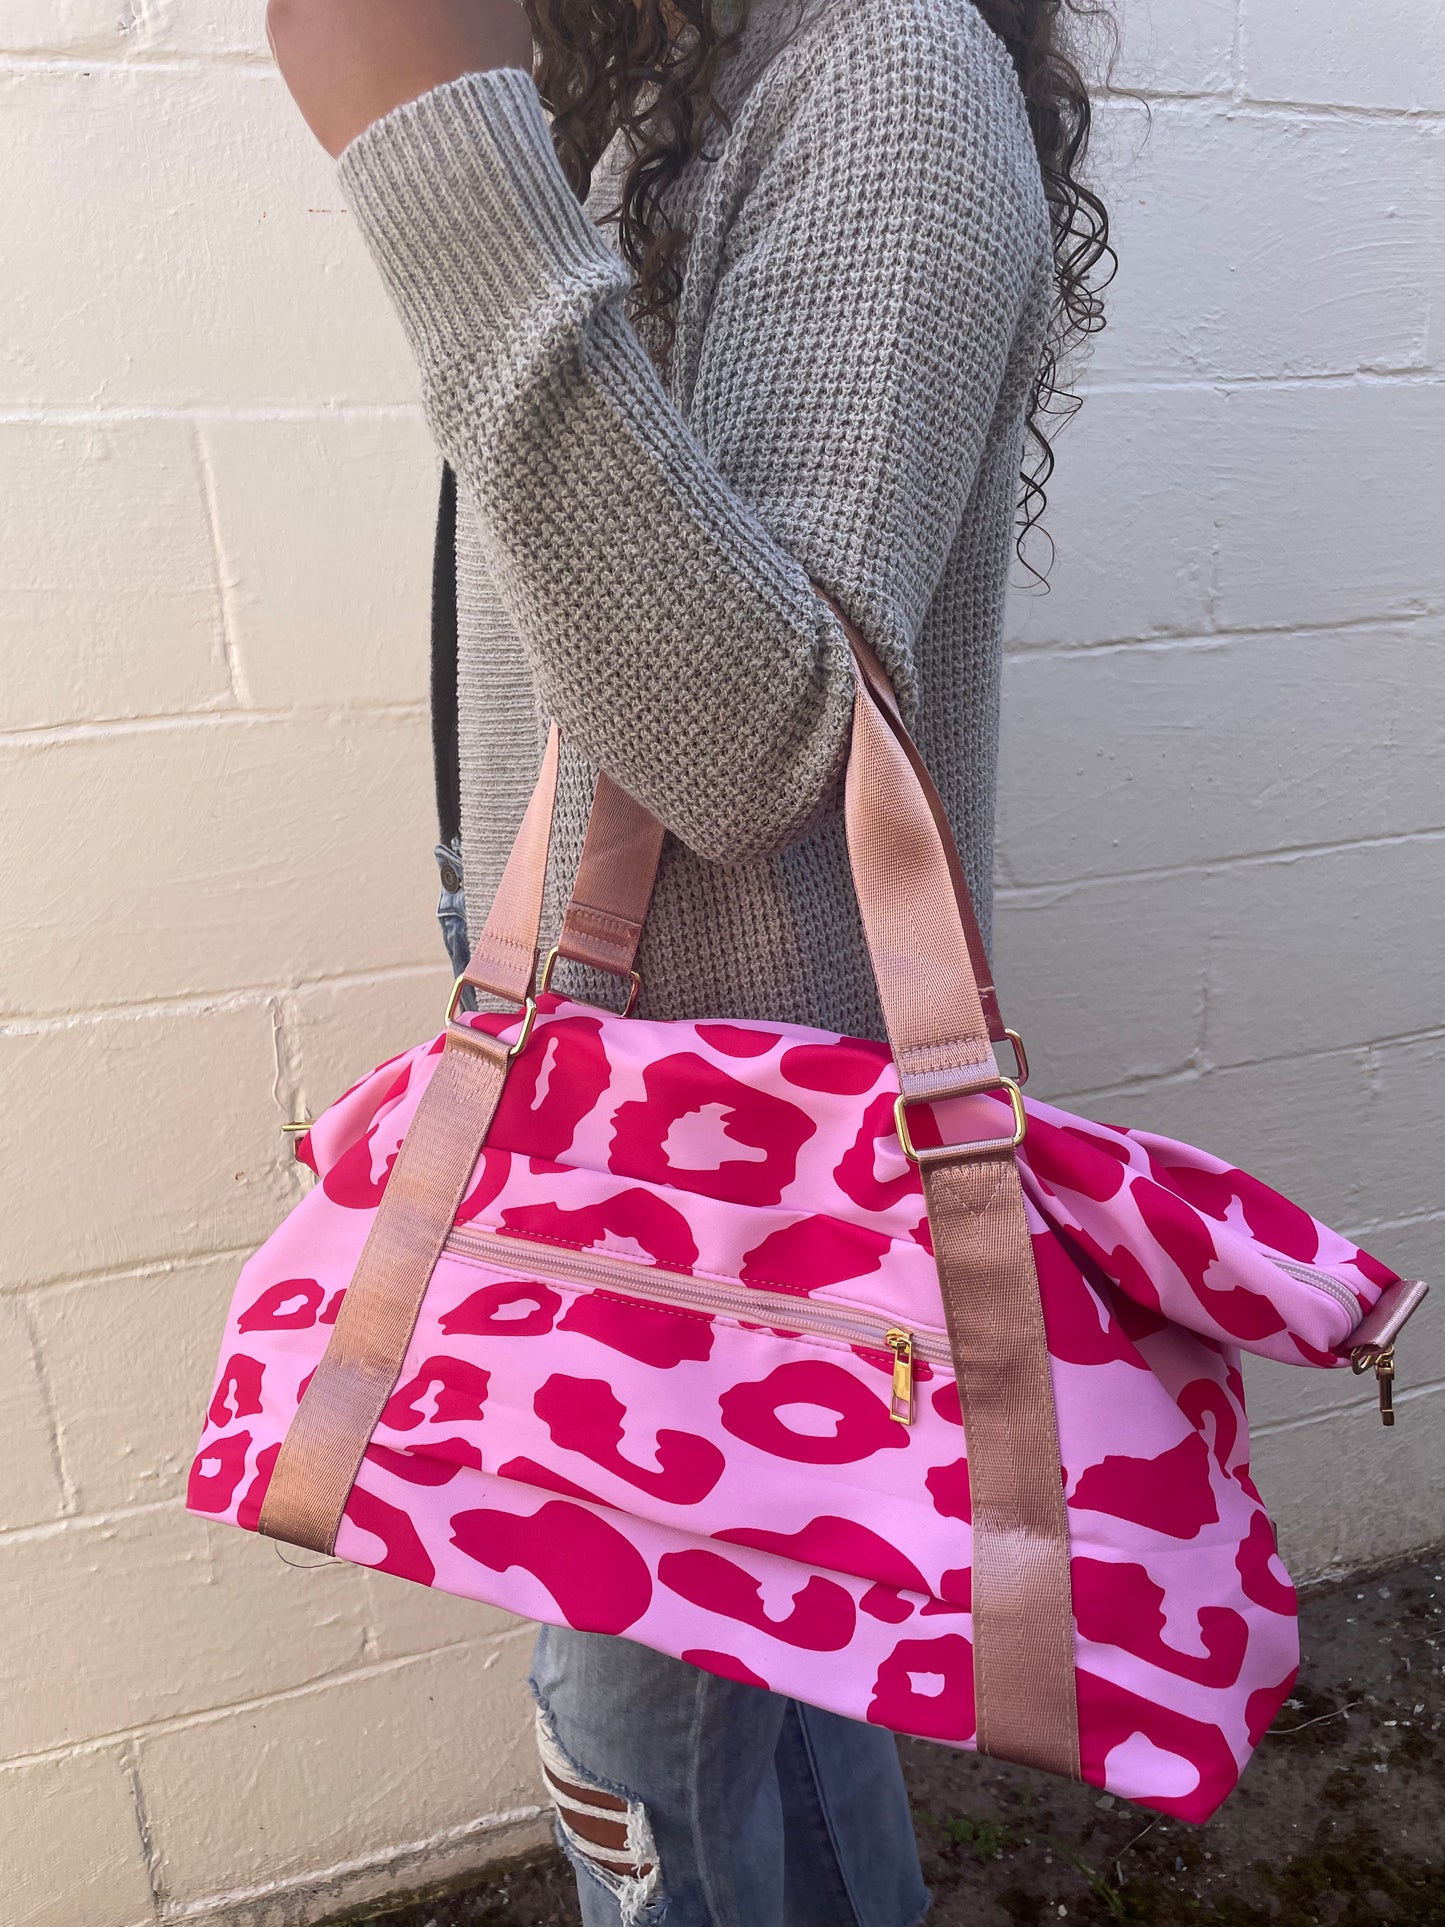 RED ON BABY PINK LEOPARD PRINT DUFFLE